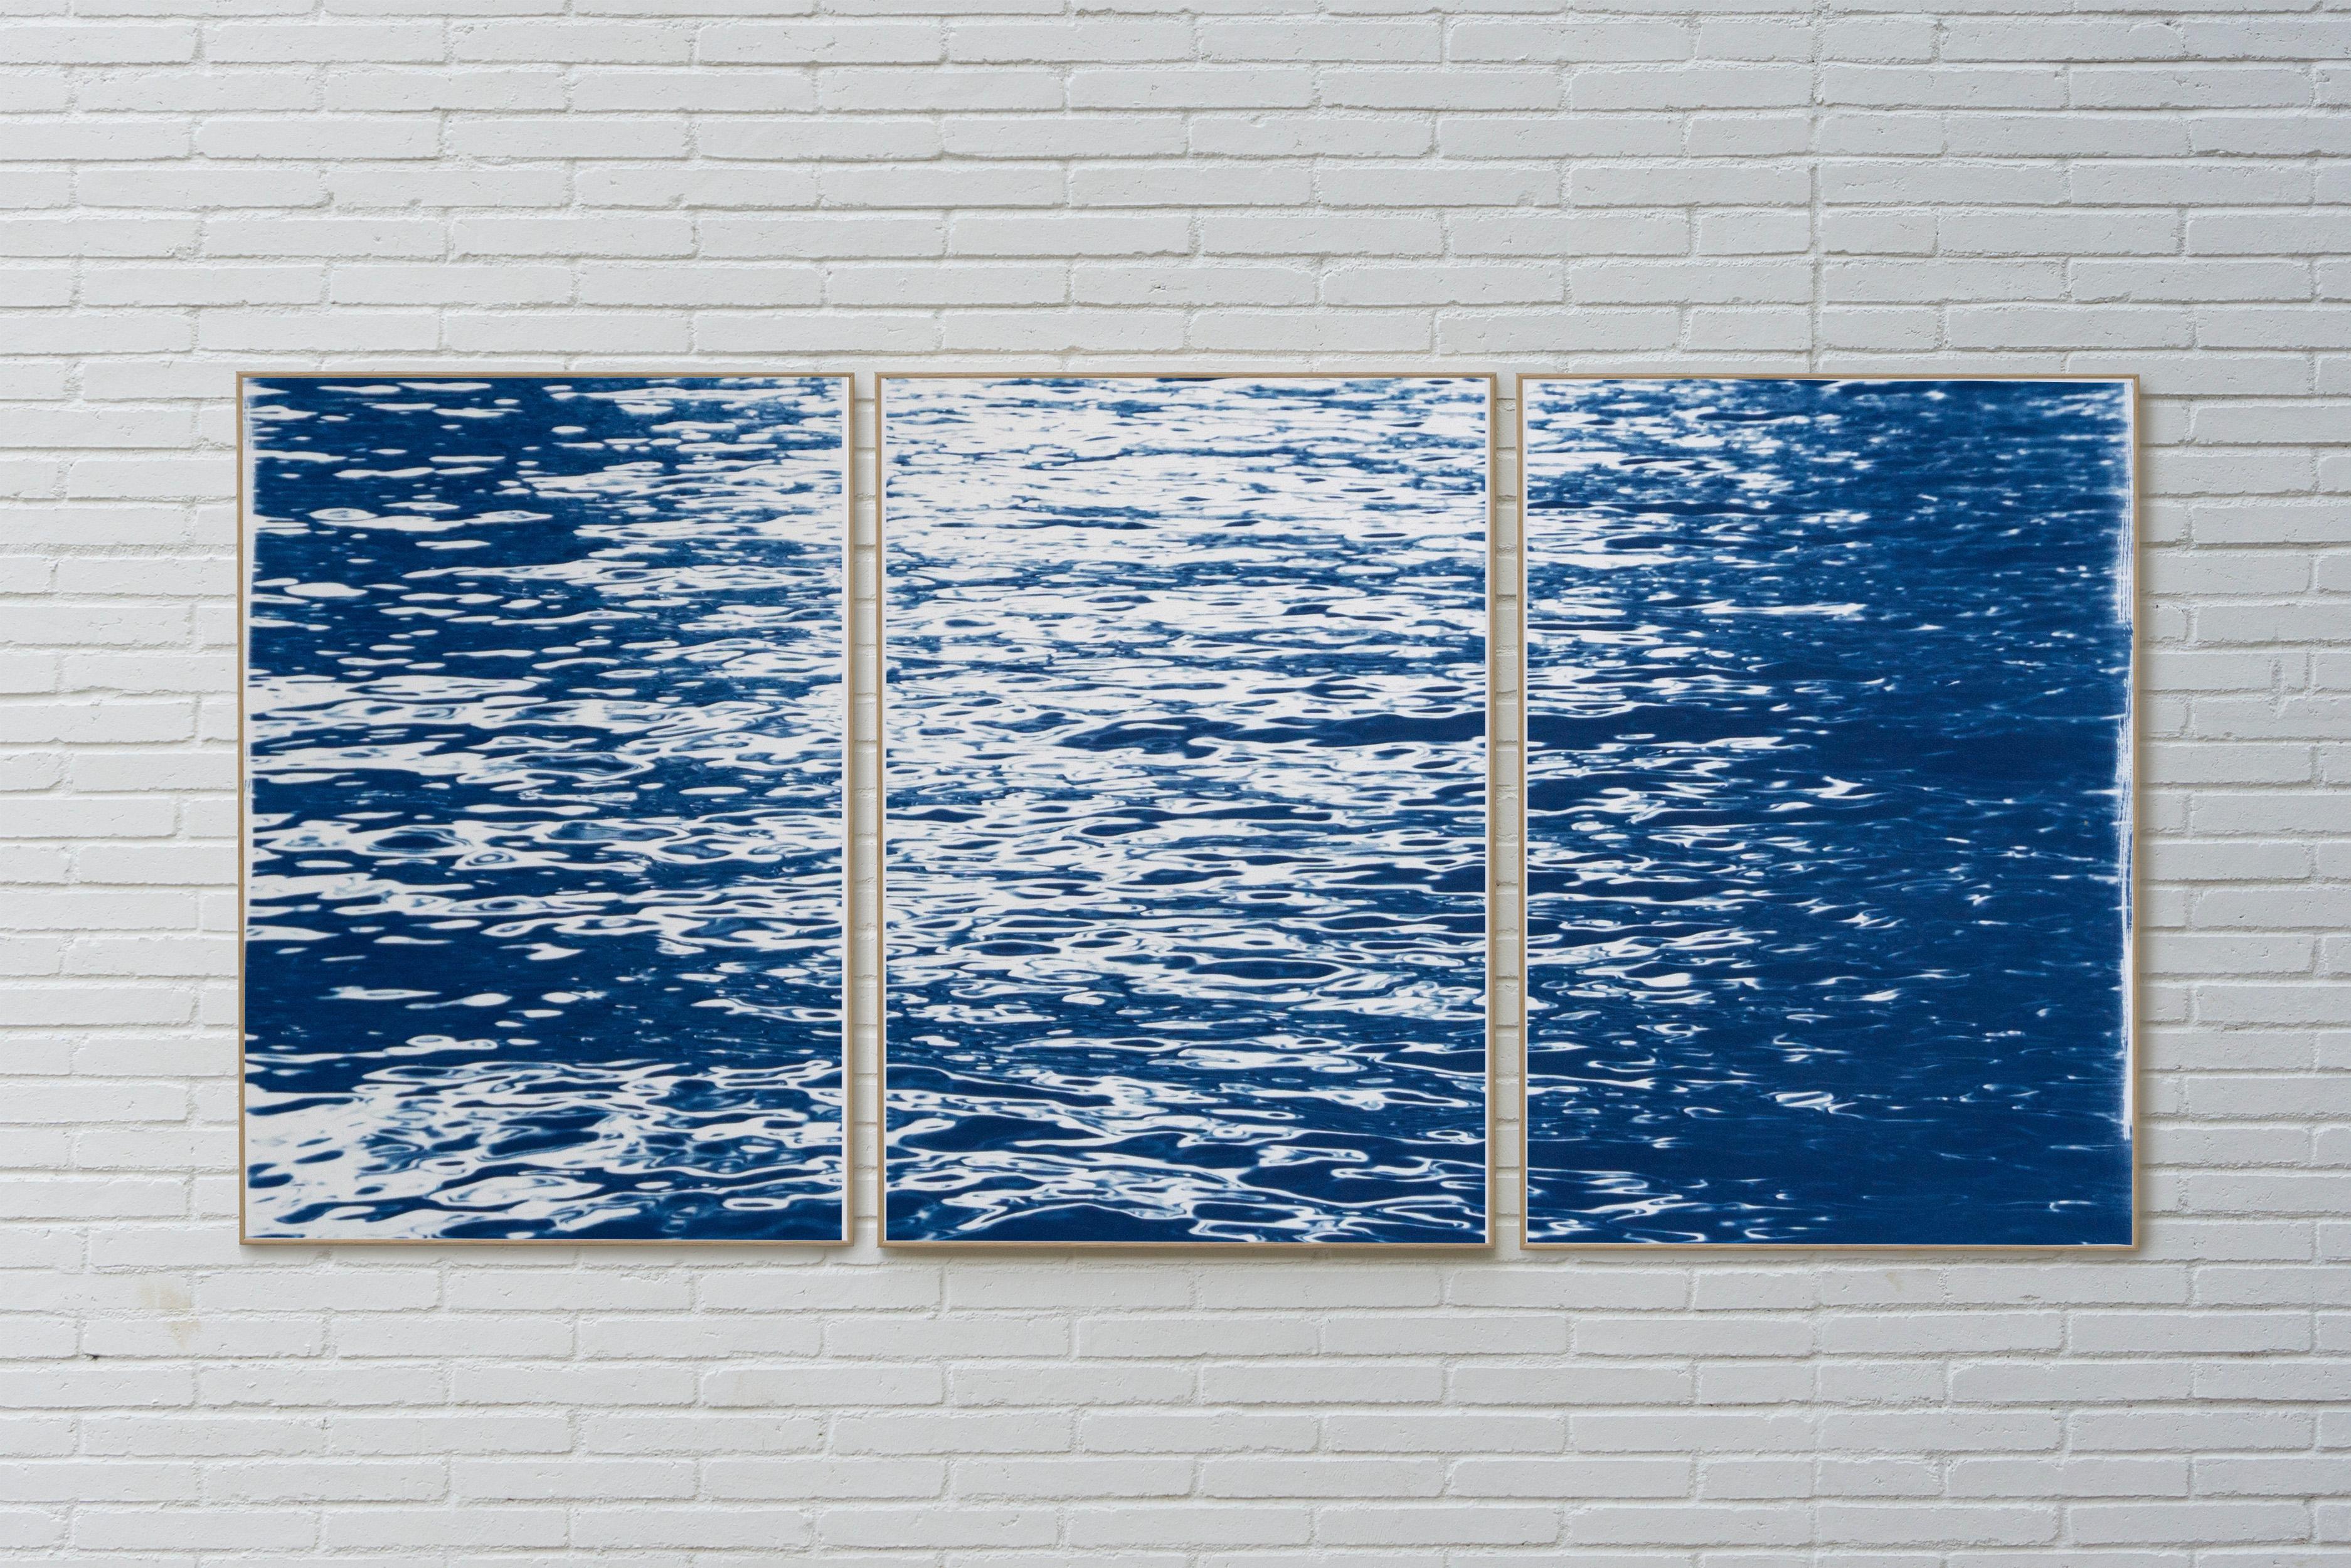 Moonlight Ripples over Lake Como, Nautical Cyanotype Triptych of Moving Water - Minimalist Print by Kind of Cyan